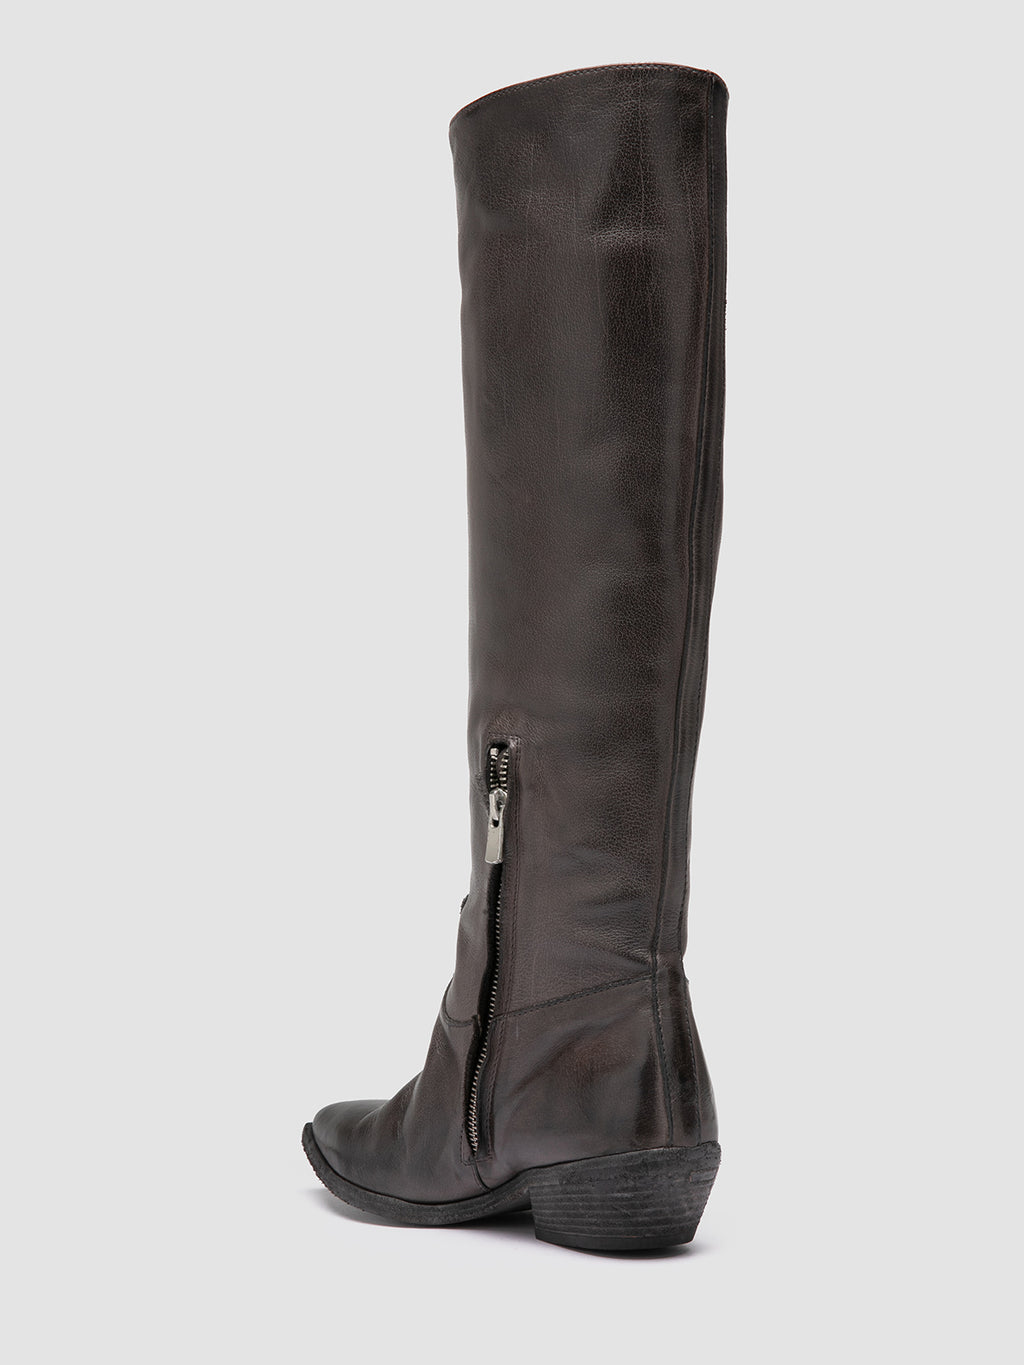 NOELIE DD 104 - Grey Leather Pull On Boots